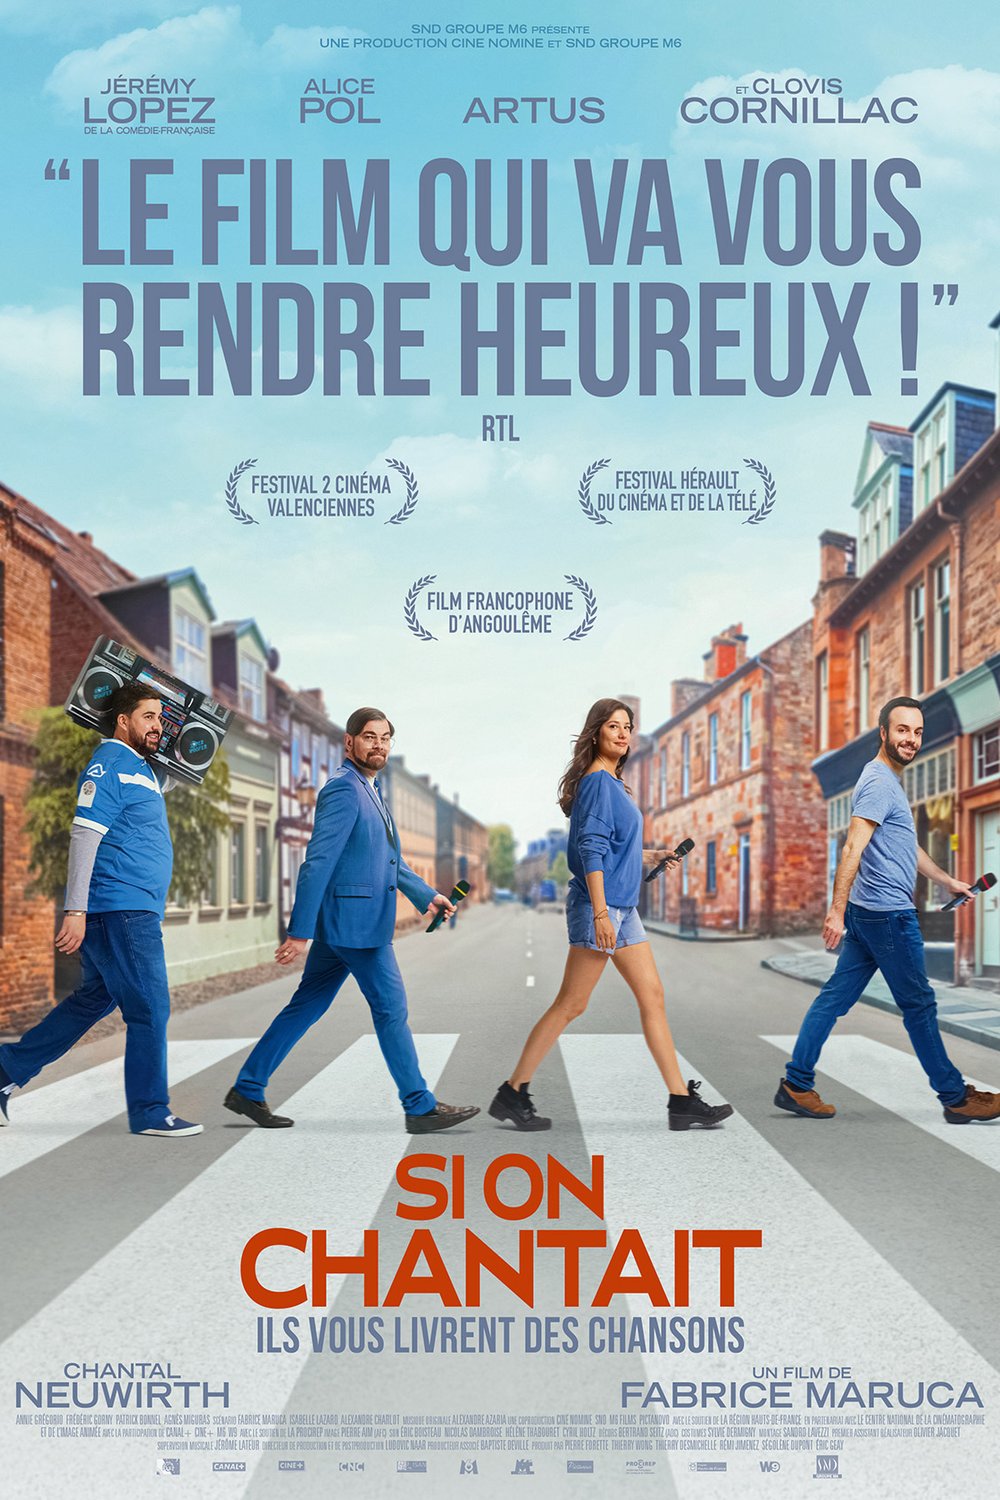 Poster of the movie Si on chantait